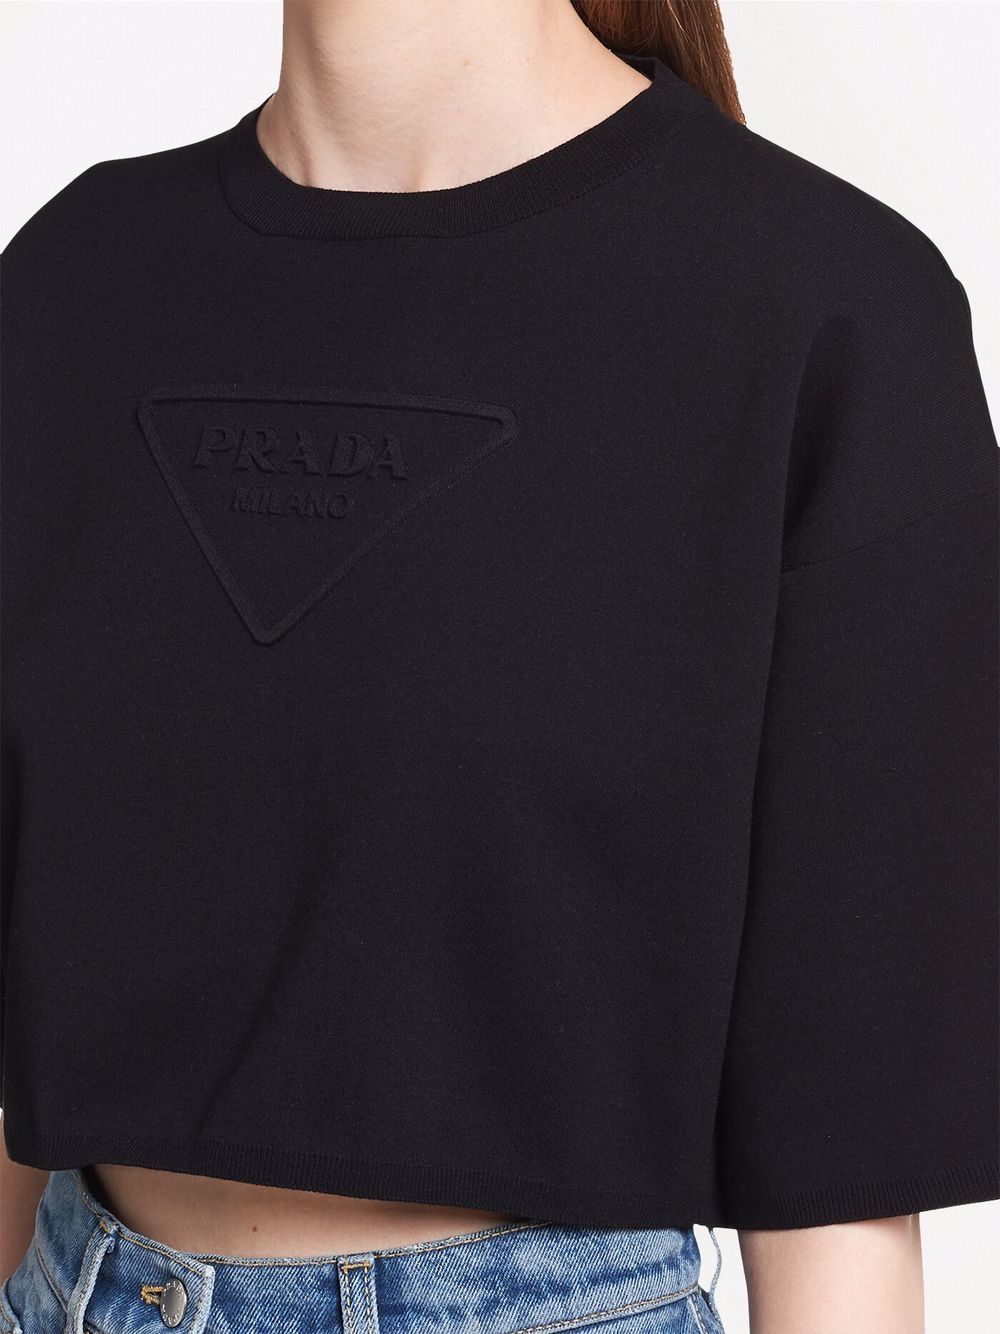 Shop Prada embossed logo cropped top with Express Delivery - FARFETCH